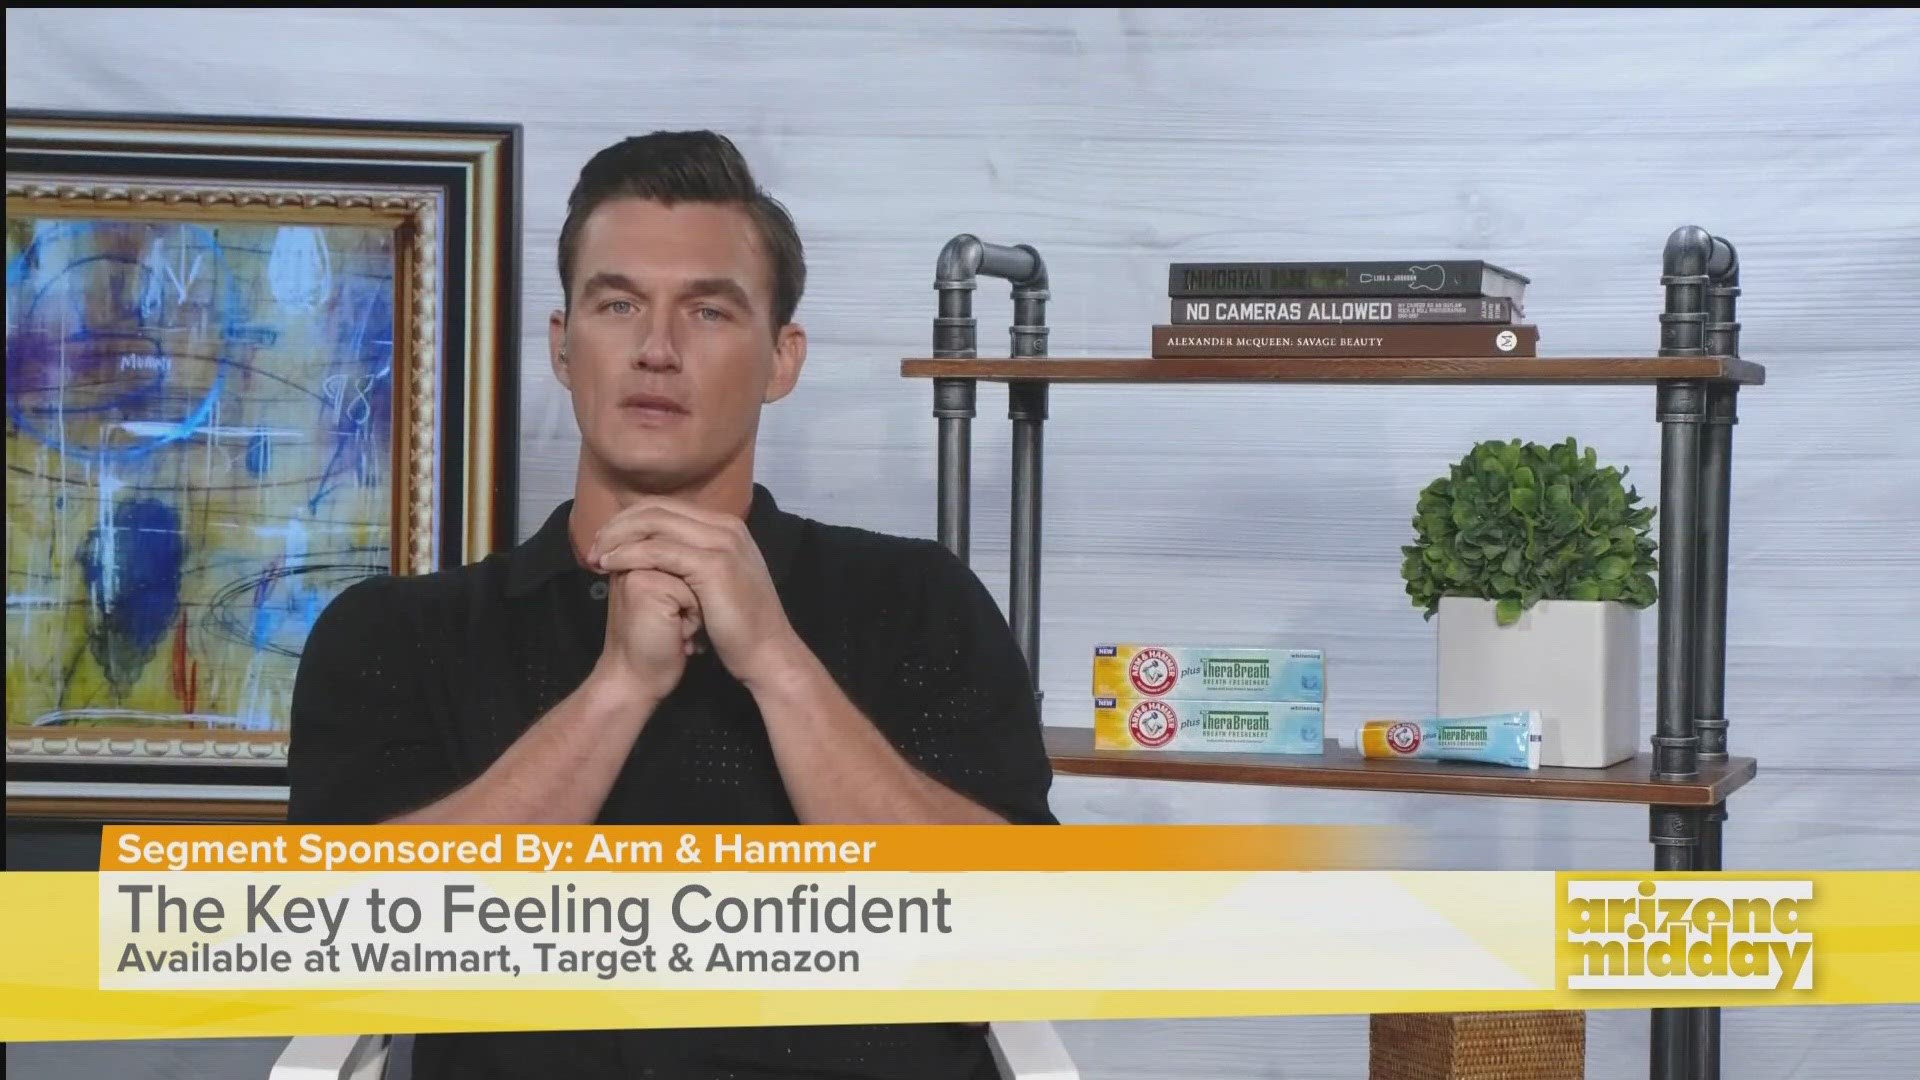 Reality TV Star Tyler Cameron talks about his new approach to getting ready with confidence for whatever the day may bring with ARM & HAMMER Toothpaste.